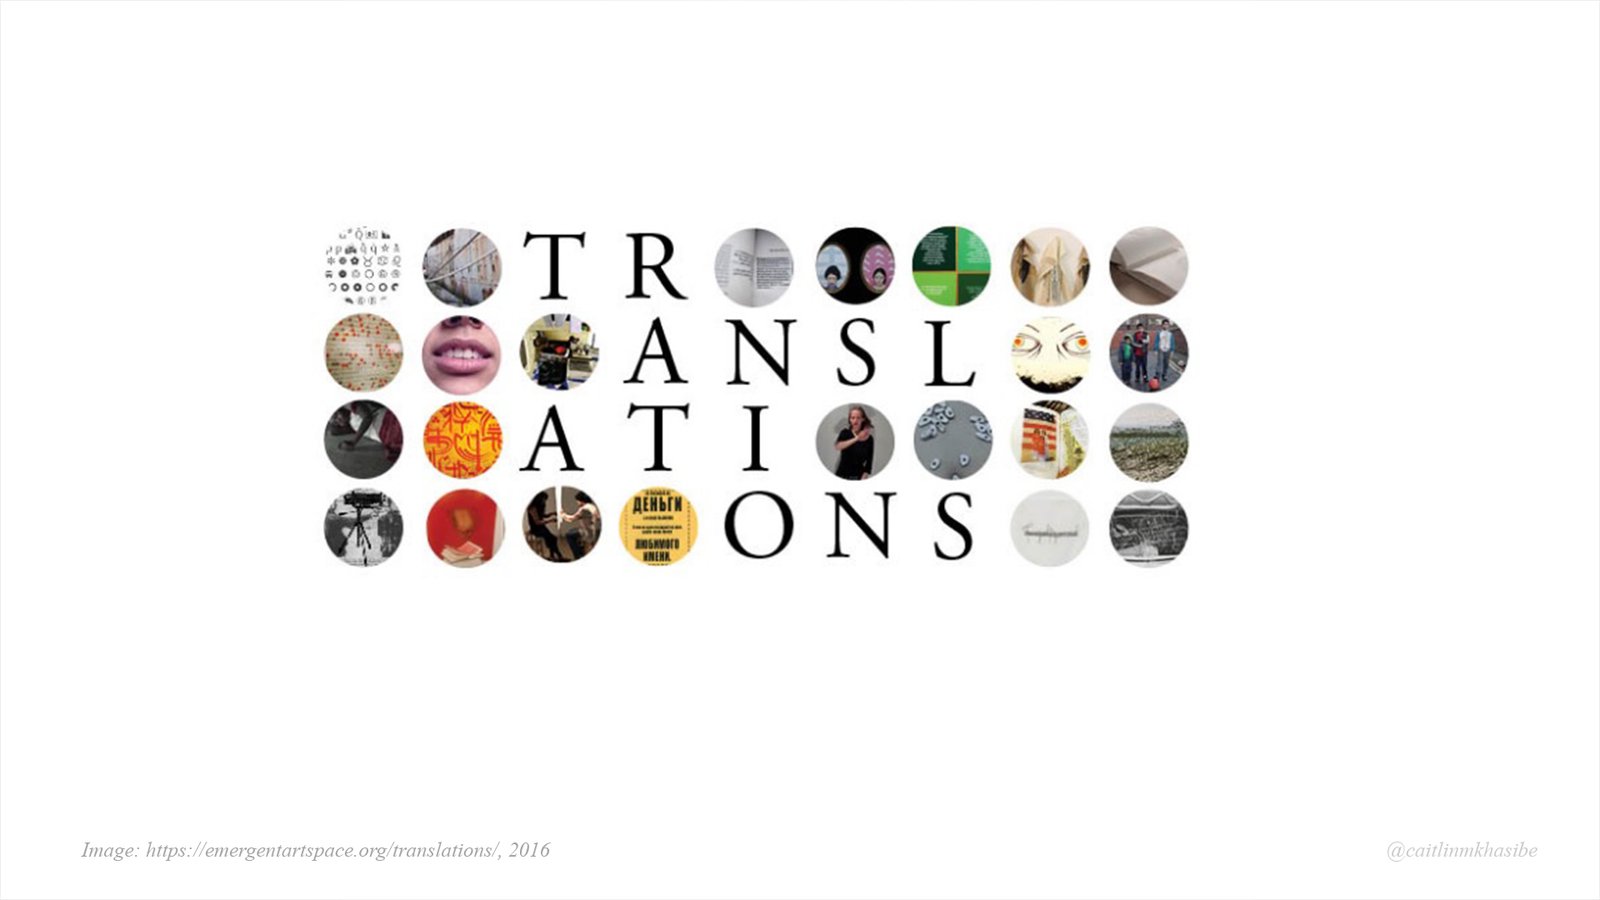 Translations by Emergent Art Space at the Rabindranath Tagore Centre in Kolkata, India.